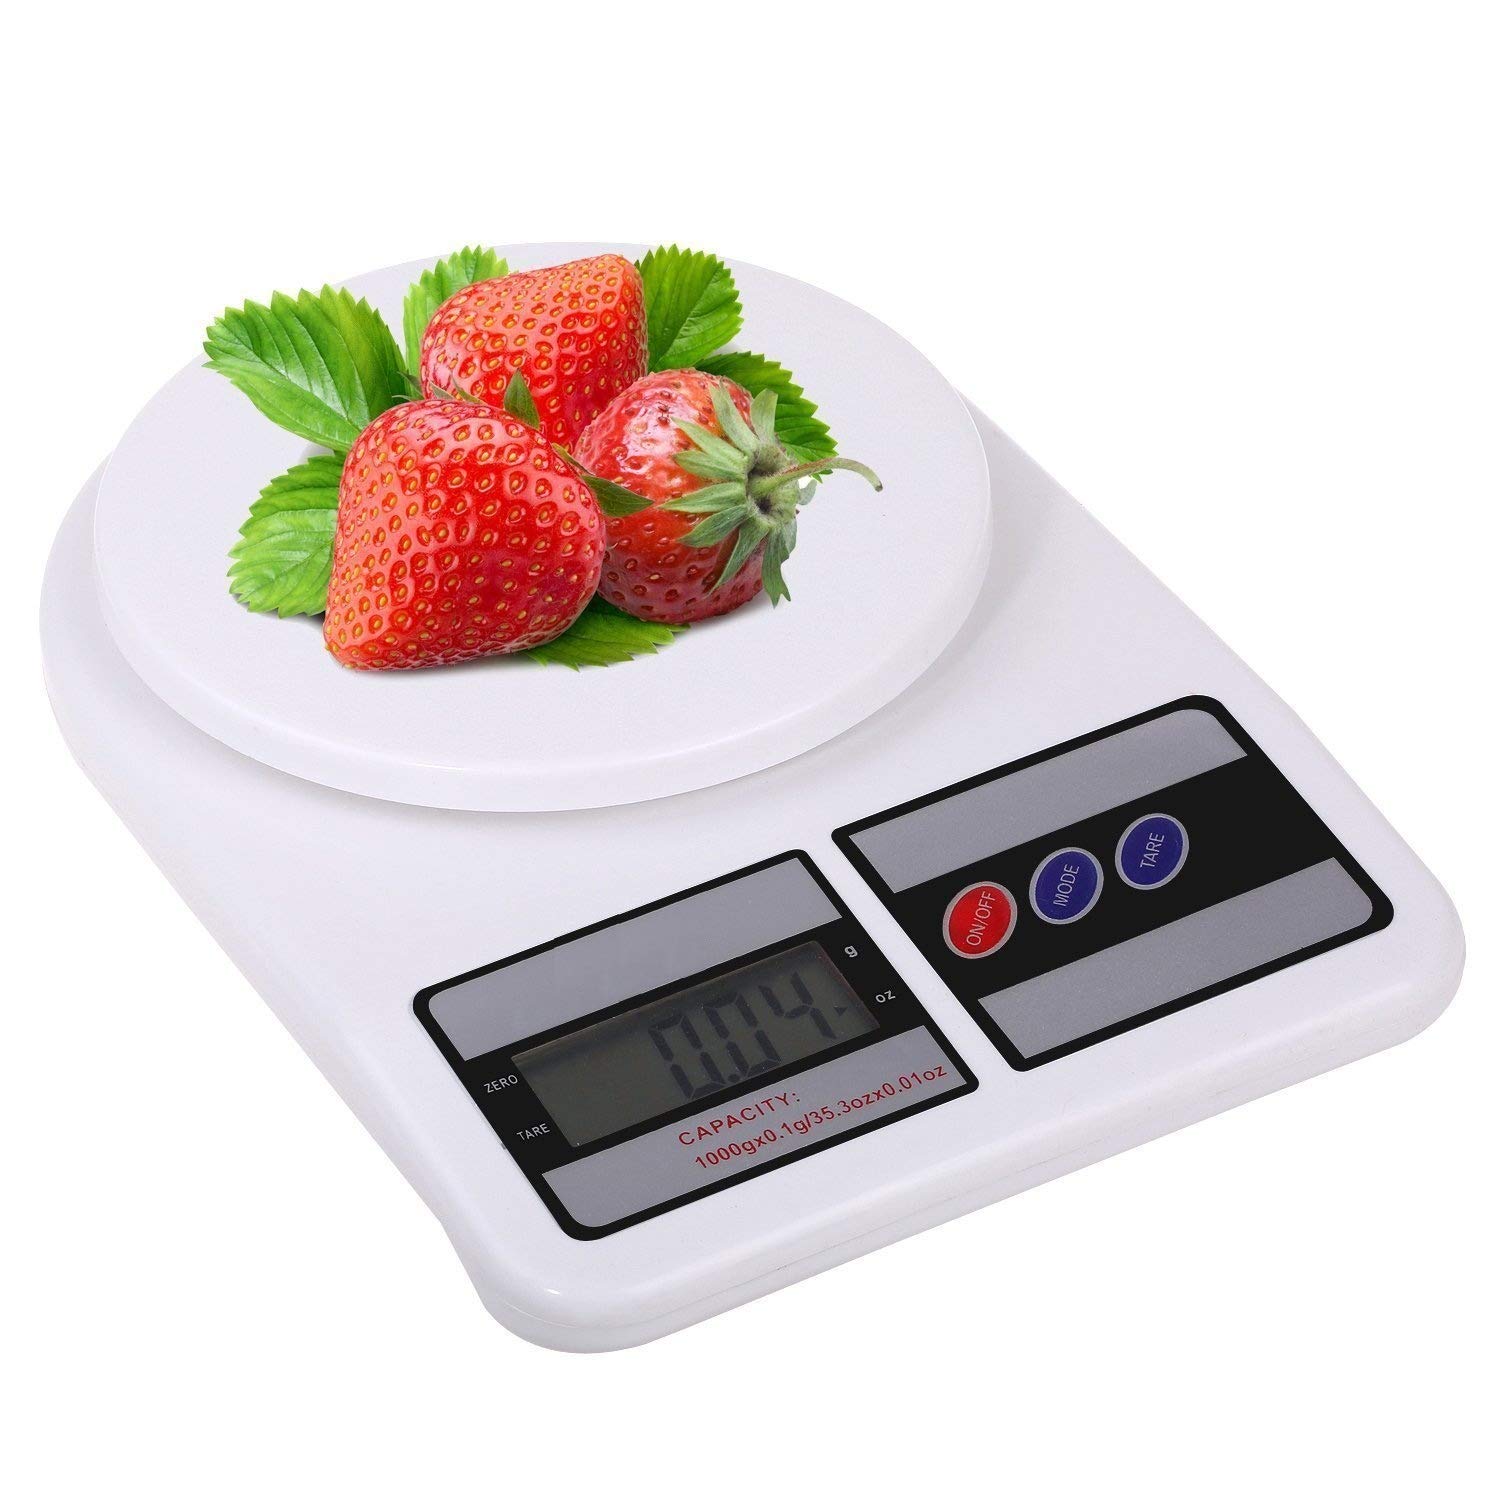 10 Best Kitchen Weighing Machine (Scale) In India 2020 For Cooking